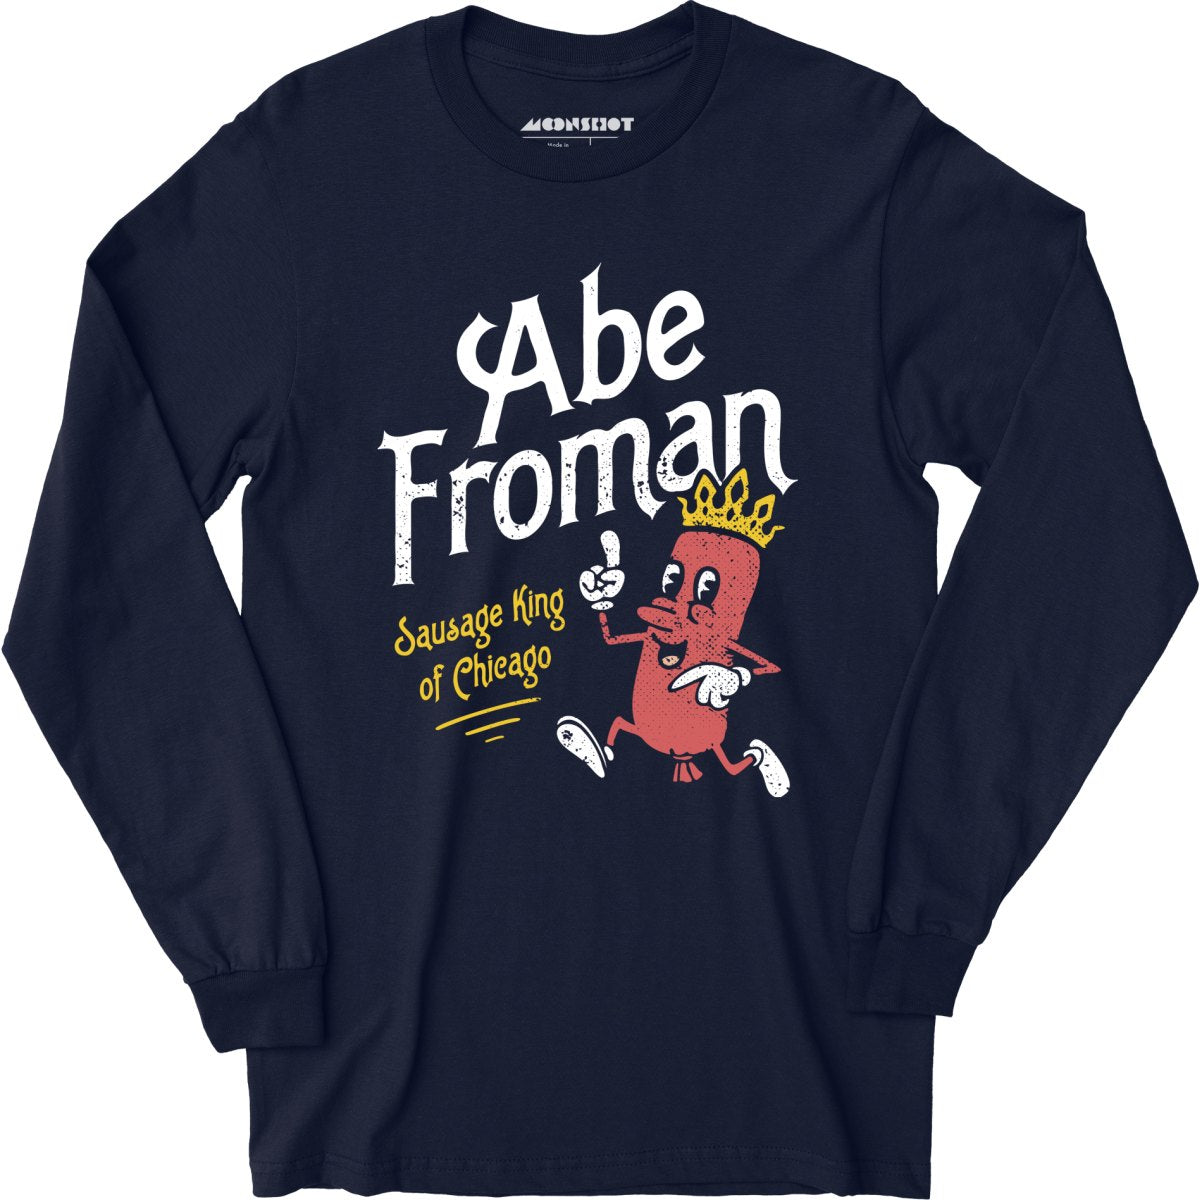 Abe Froman - Sausage King of Chicago - Long Sleeve T-Shirt